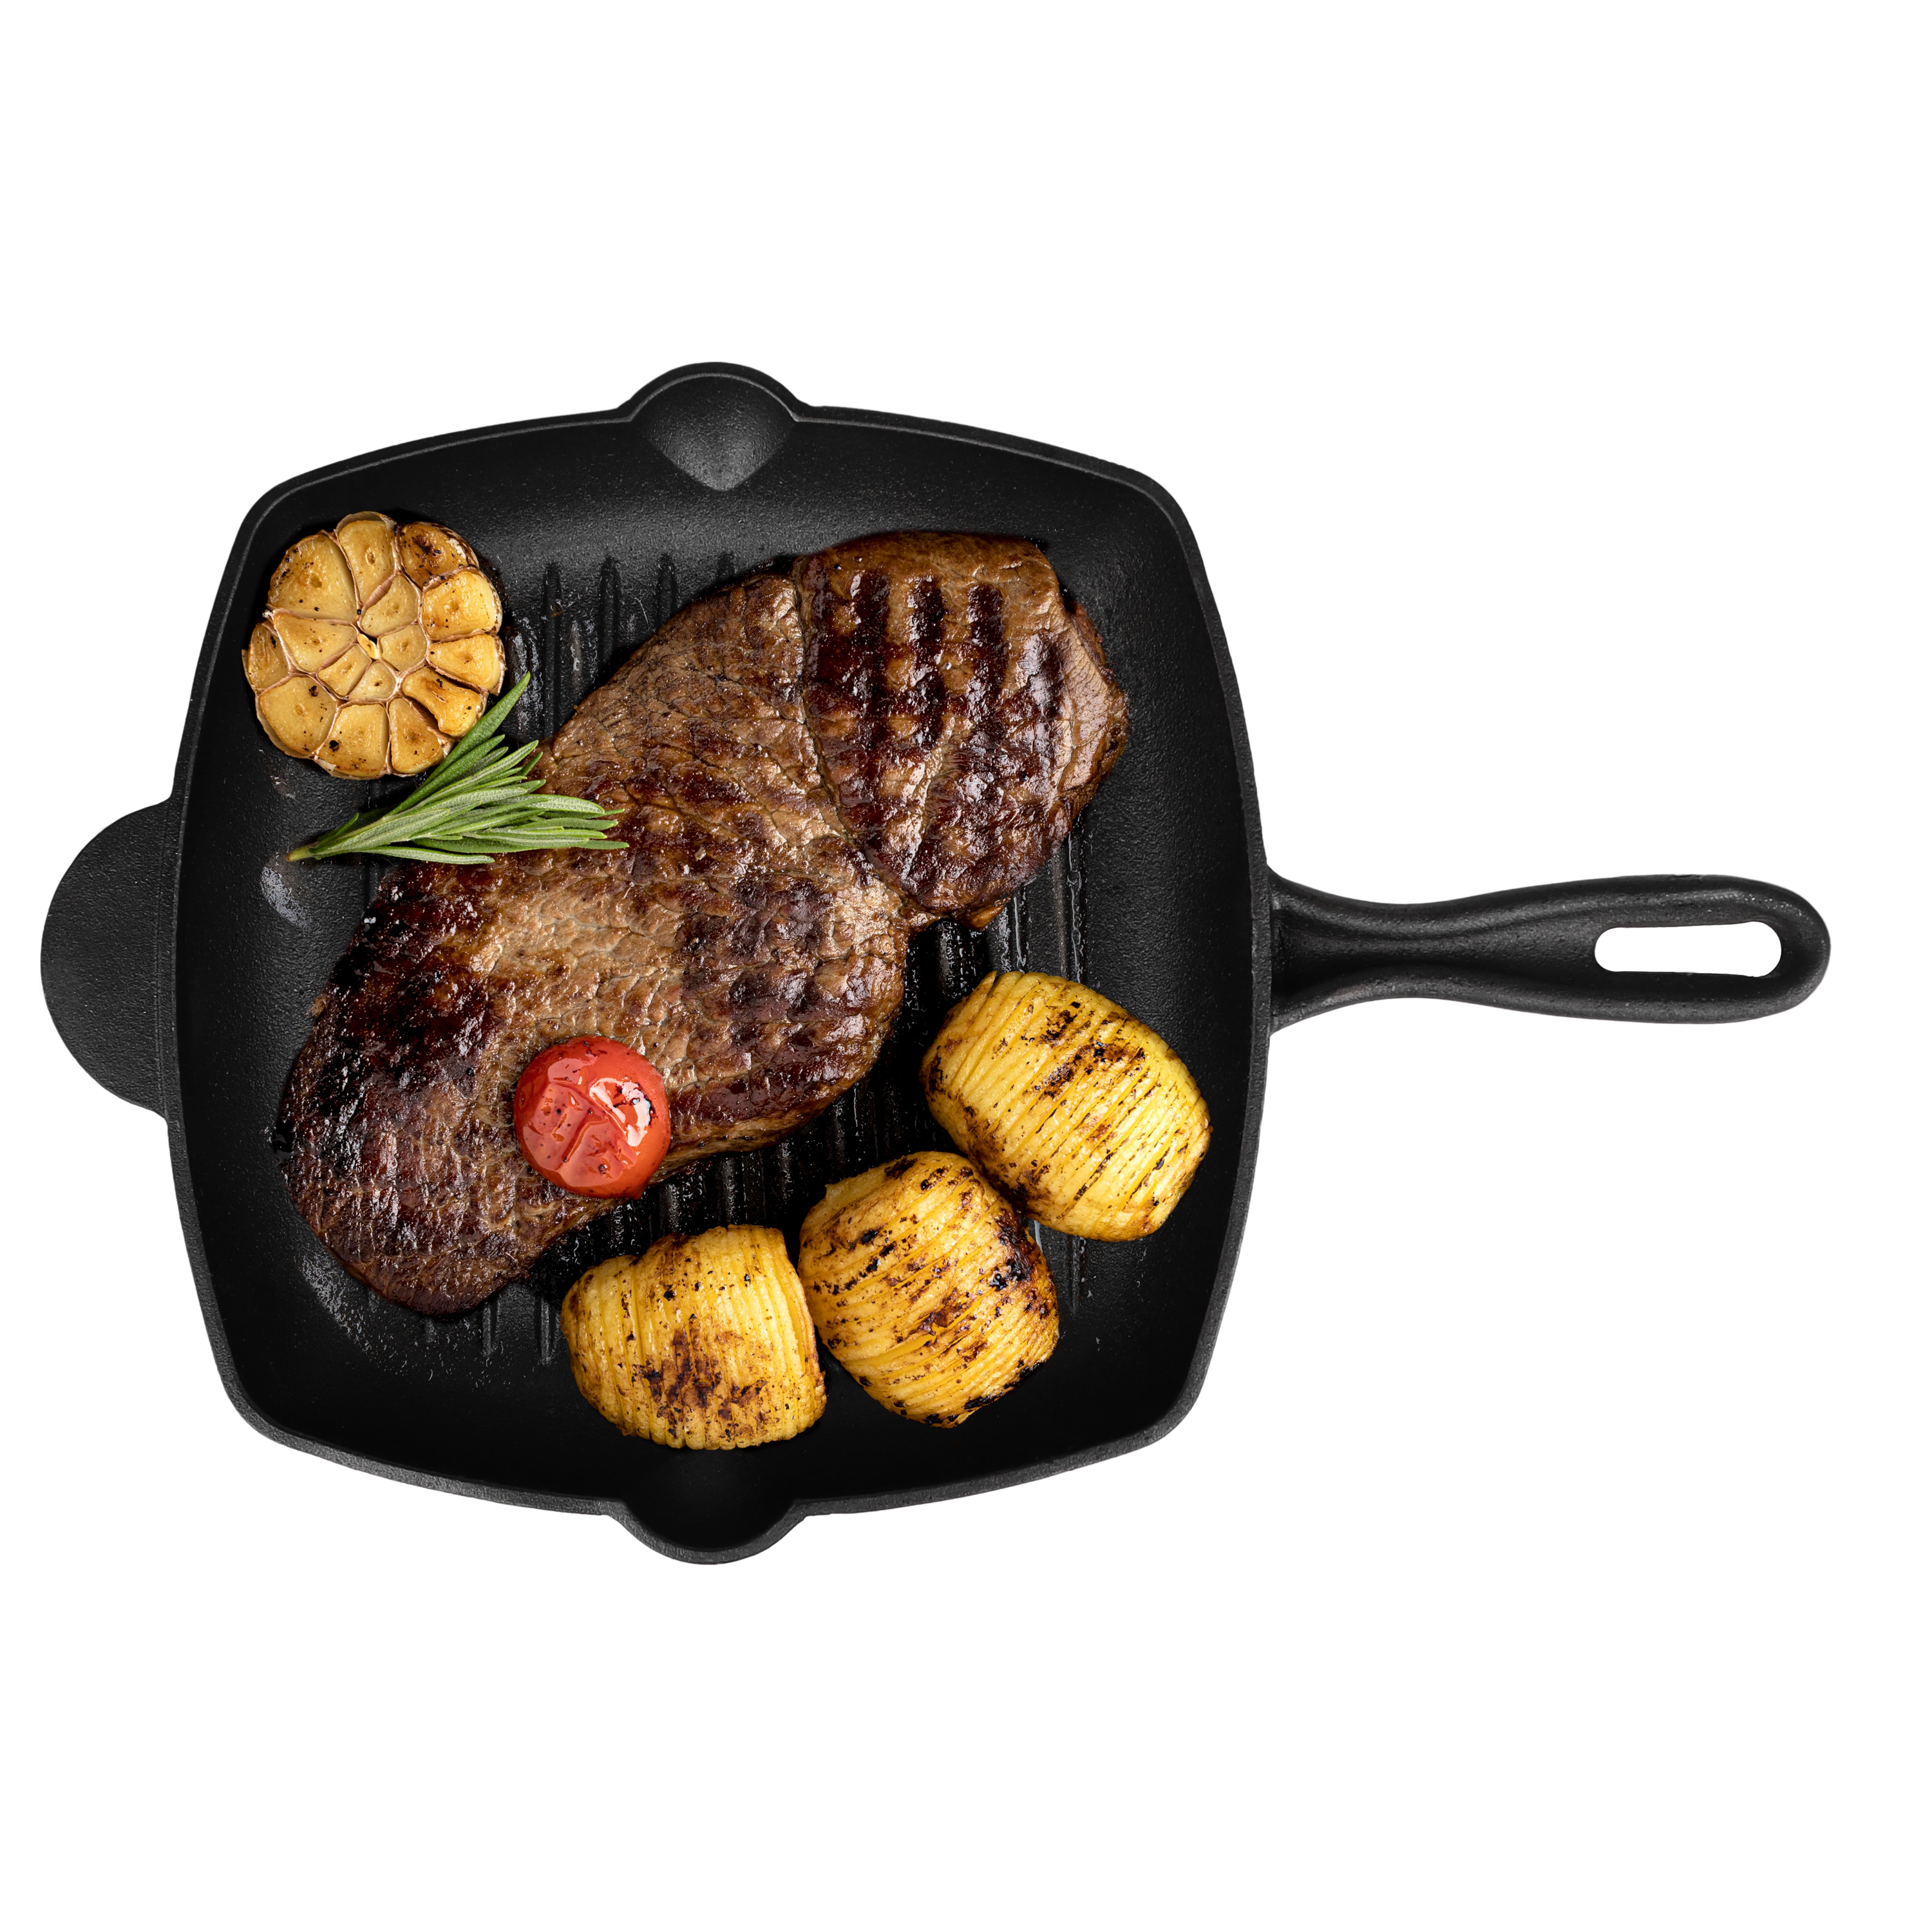 chef best quality grill pan cast iron skillet at best price in pakistan